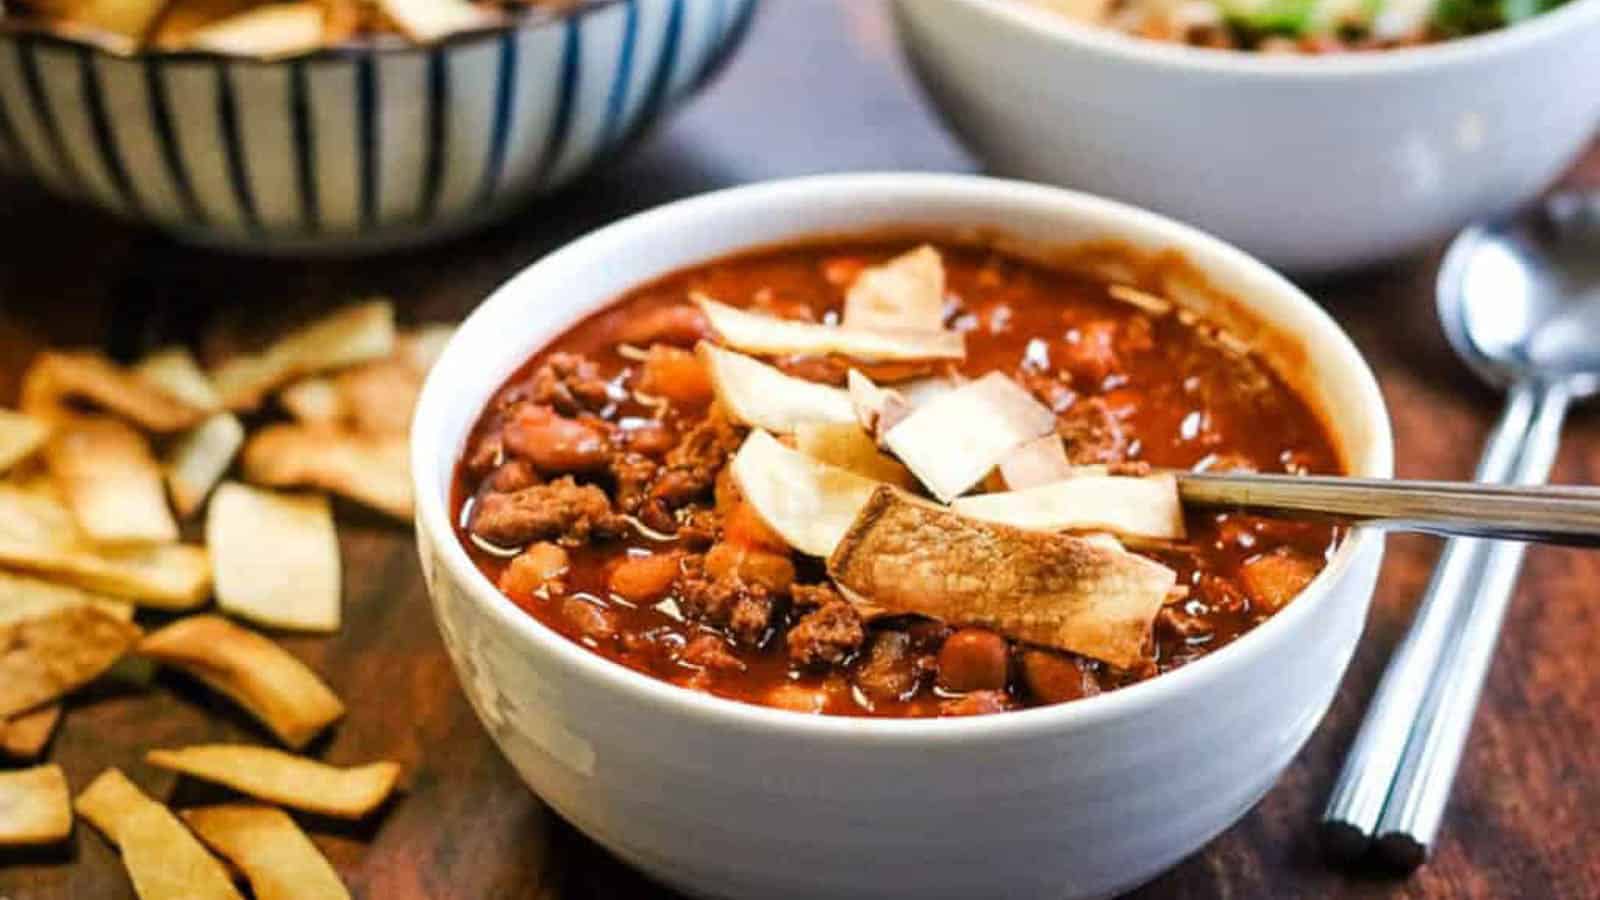 Bowl of chili with baked tortilla strips.